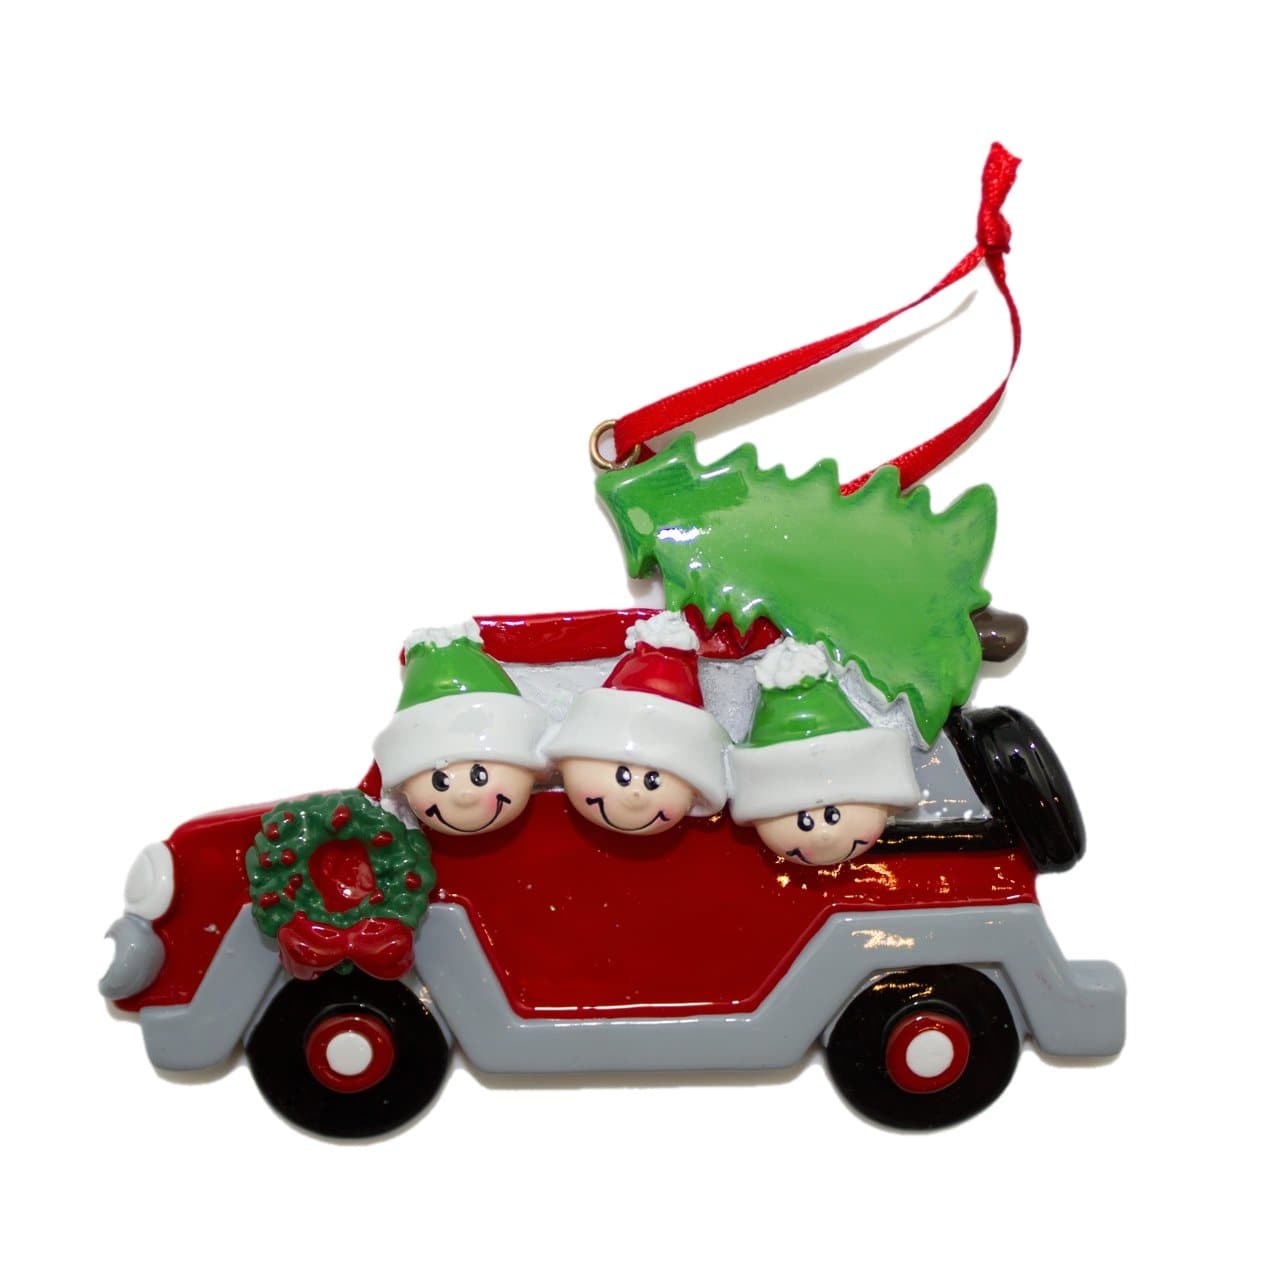 Car - Christmas Ornament (Suitable for Personalization)